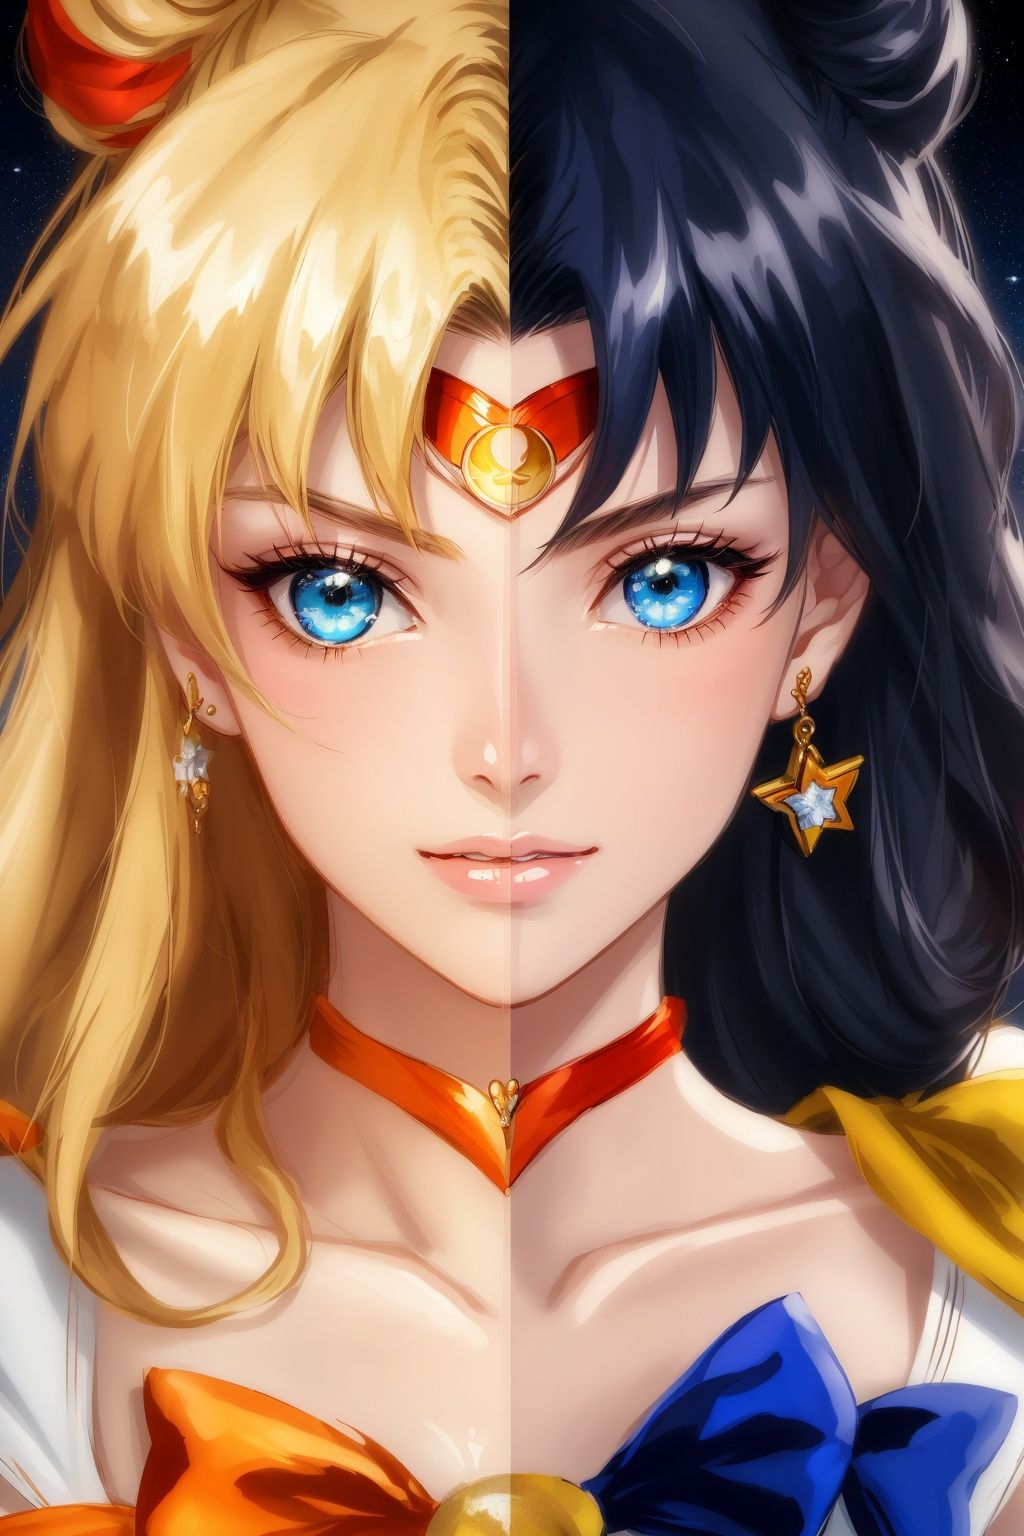 sailor moon wallpapers, fan art wallpapers, girl anime, sailor moon, sailor moon wallpaper, sailor moon , in the style of tanya shatseva, light bronze and orange, close-up intensity, dark sky-blue and white, magali villeneuve, light orange and light navy, colorful costumes